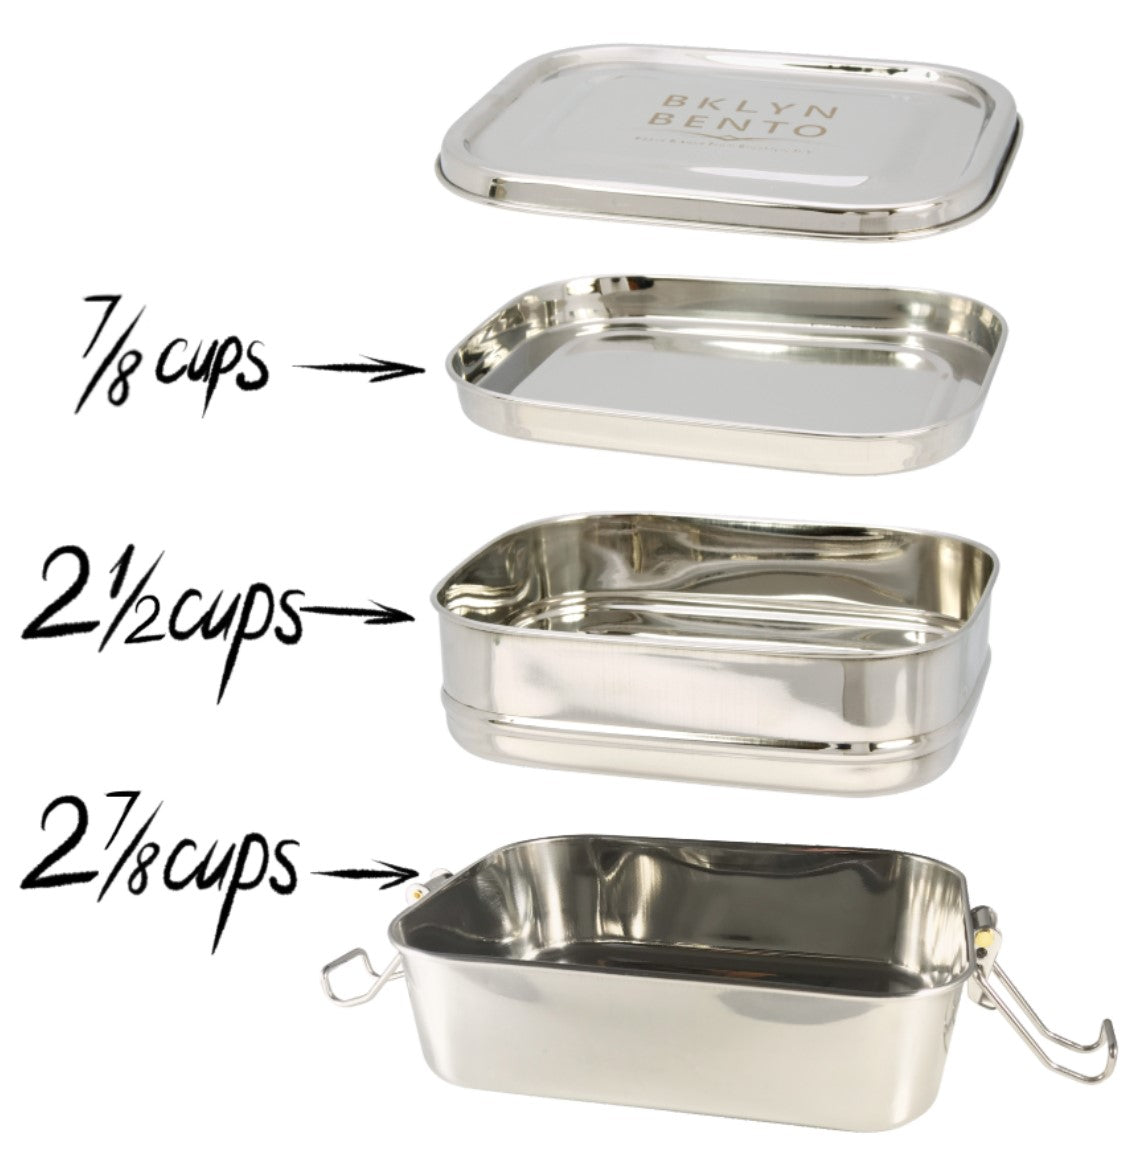 Bklyn Bento Stainless Steel Lunch Box - A Single Jumbo Compartment